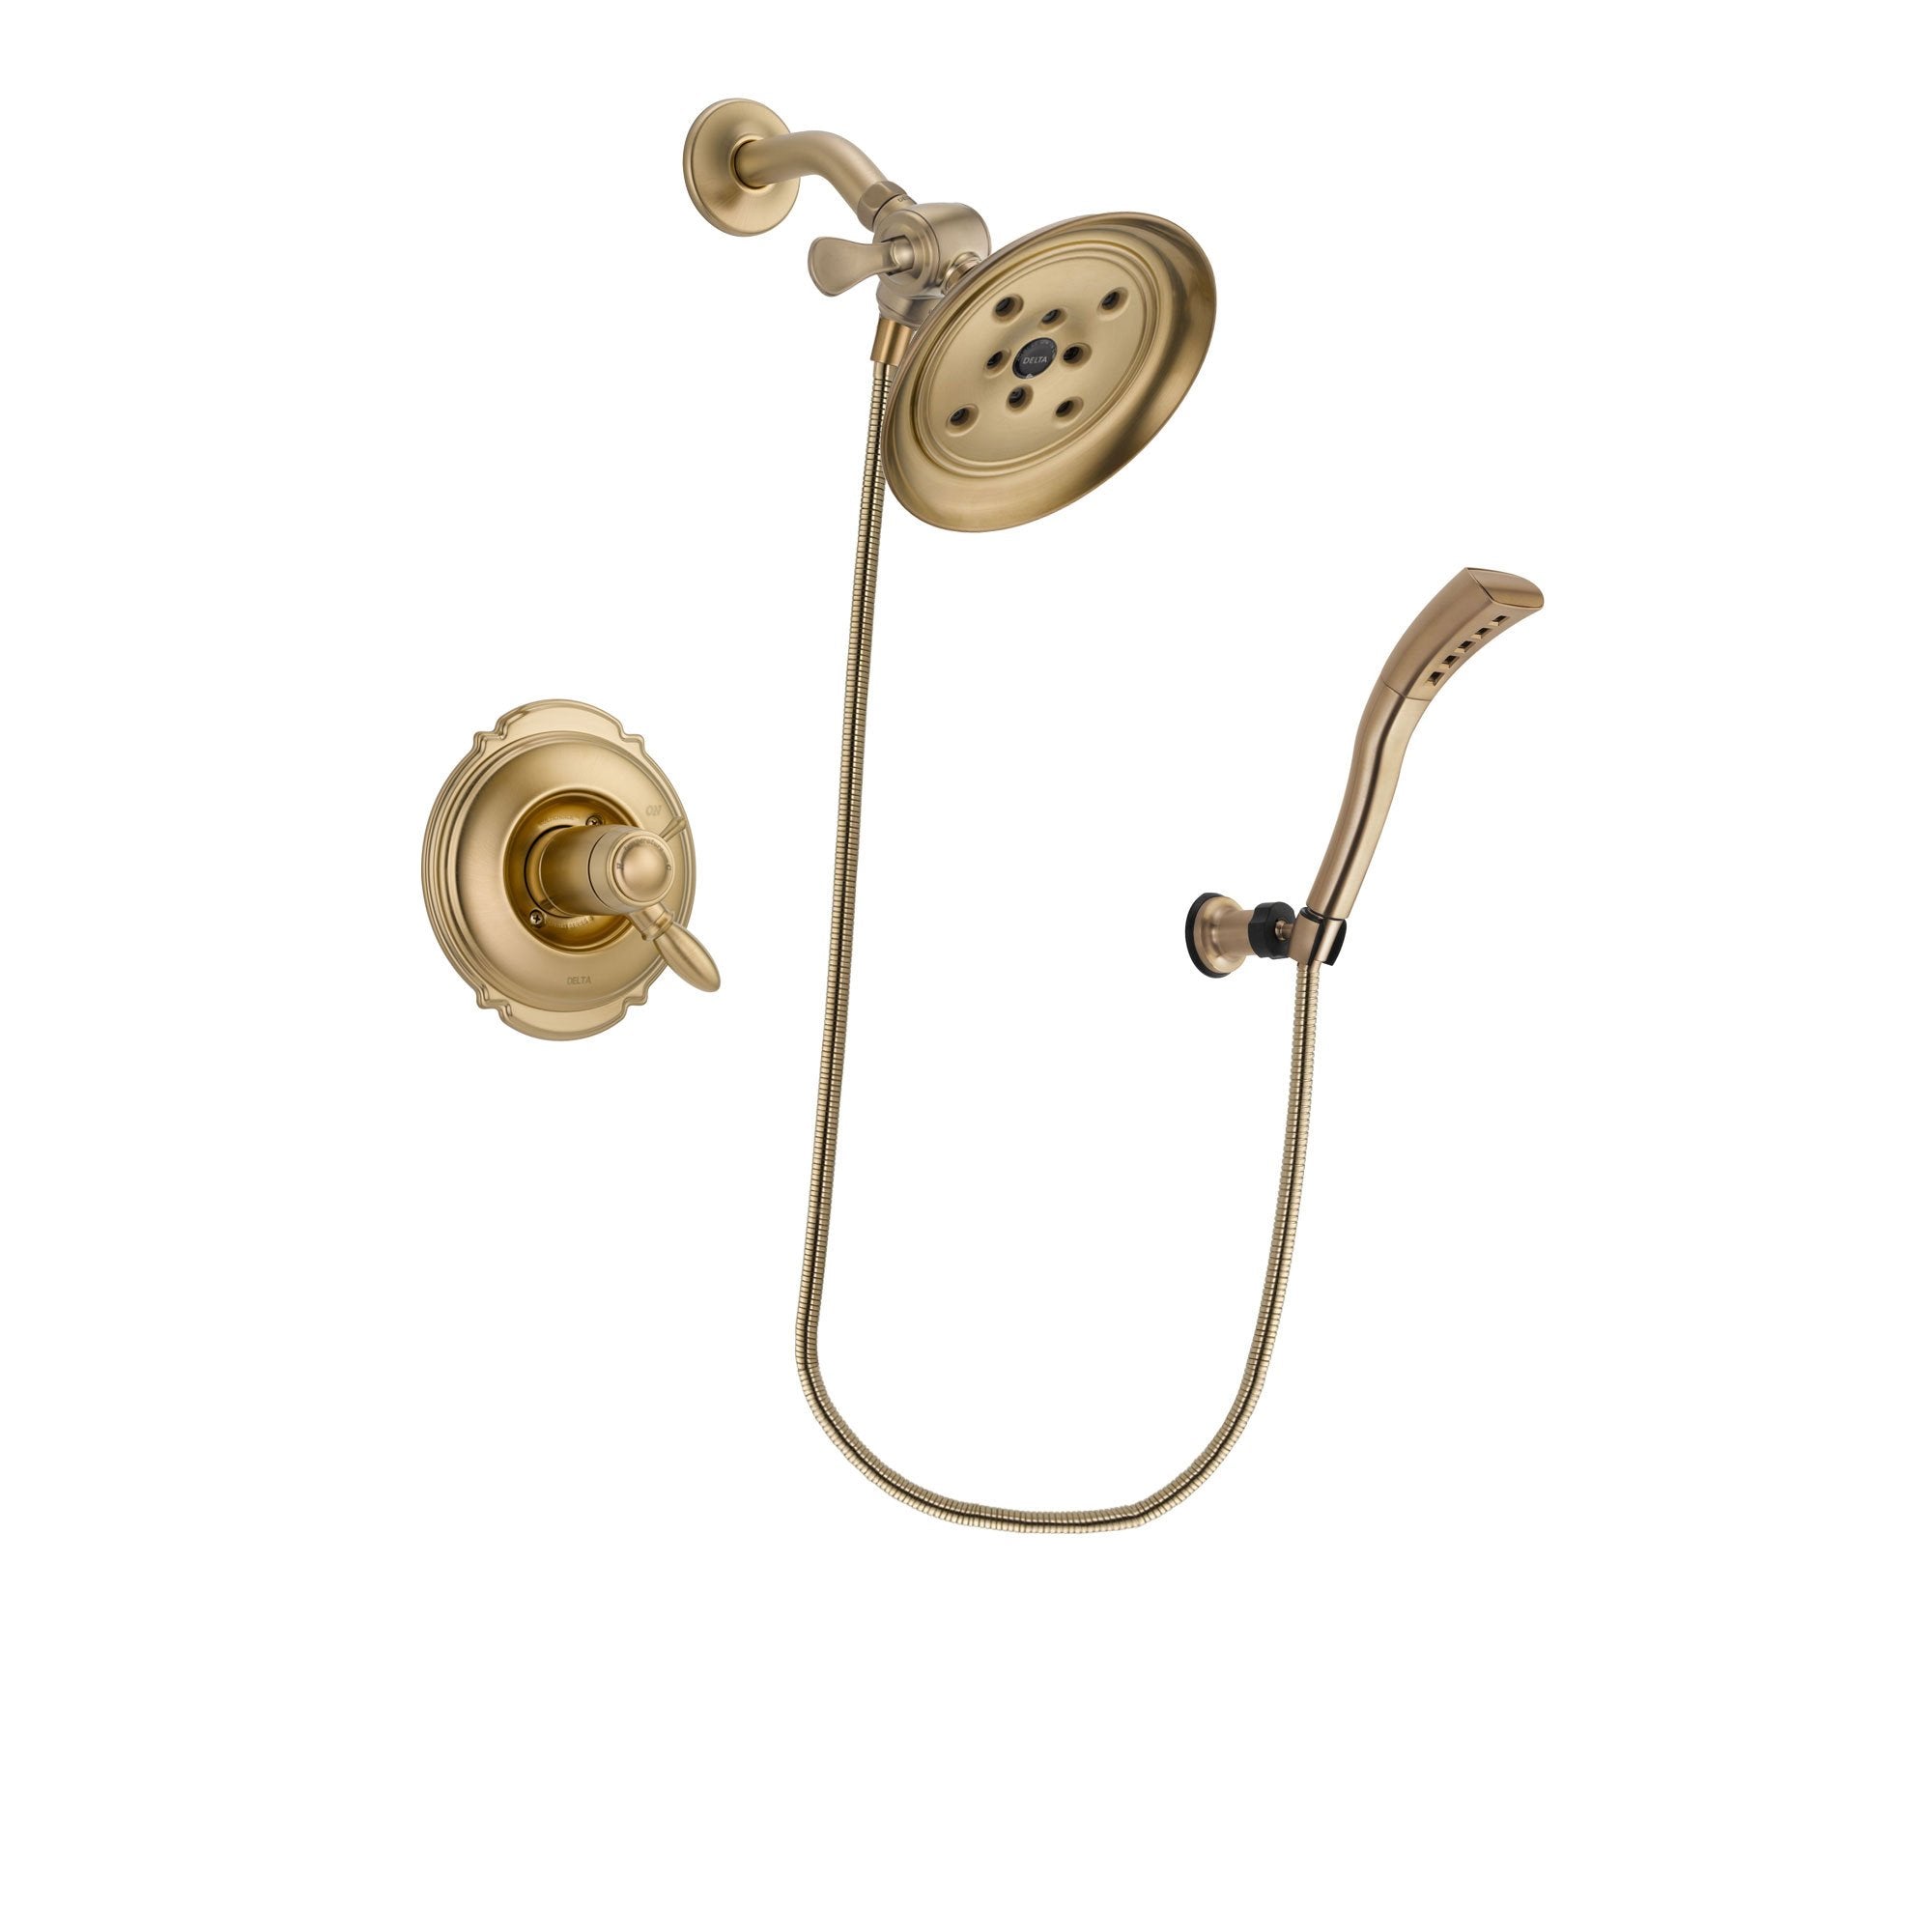 Delta Victorian Champagne Bronze Finish Thermostatic Shower Faucet System Package with Large Rain Shower Head and Modern Wall Mount Personal Handheld Shower Spray Includes Rough-in Valve DSP3684V